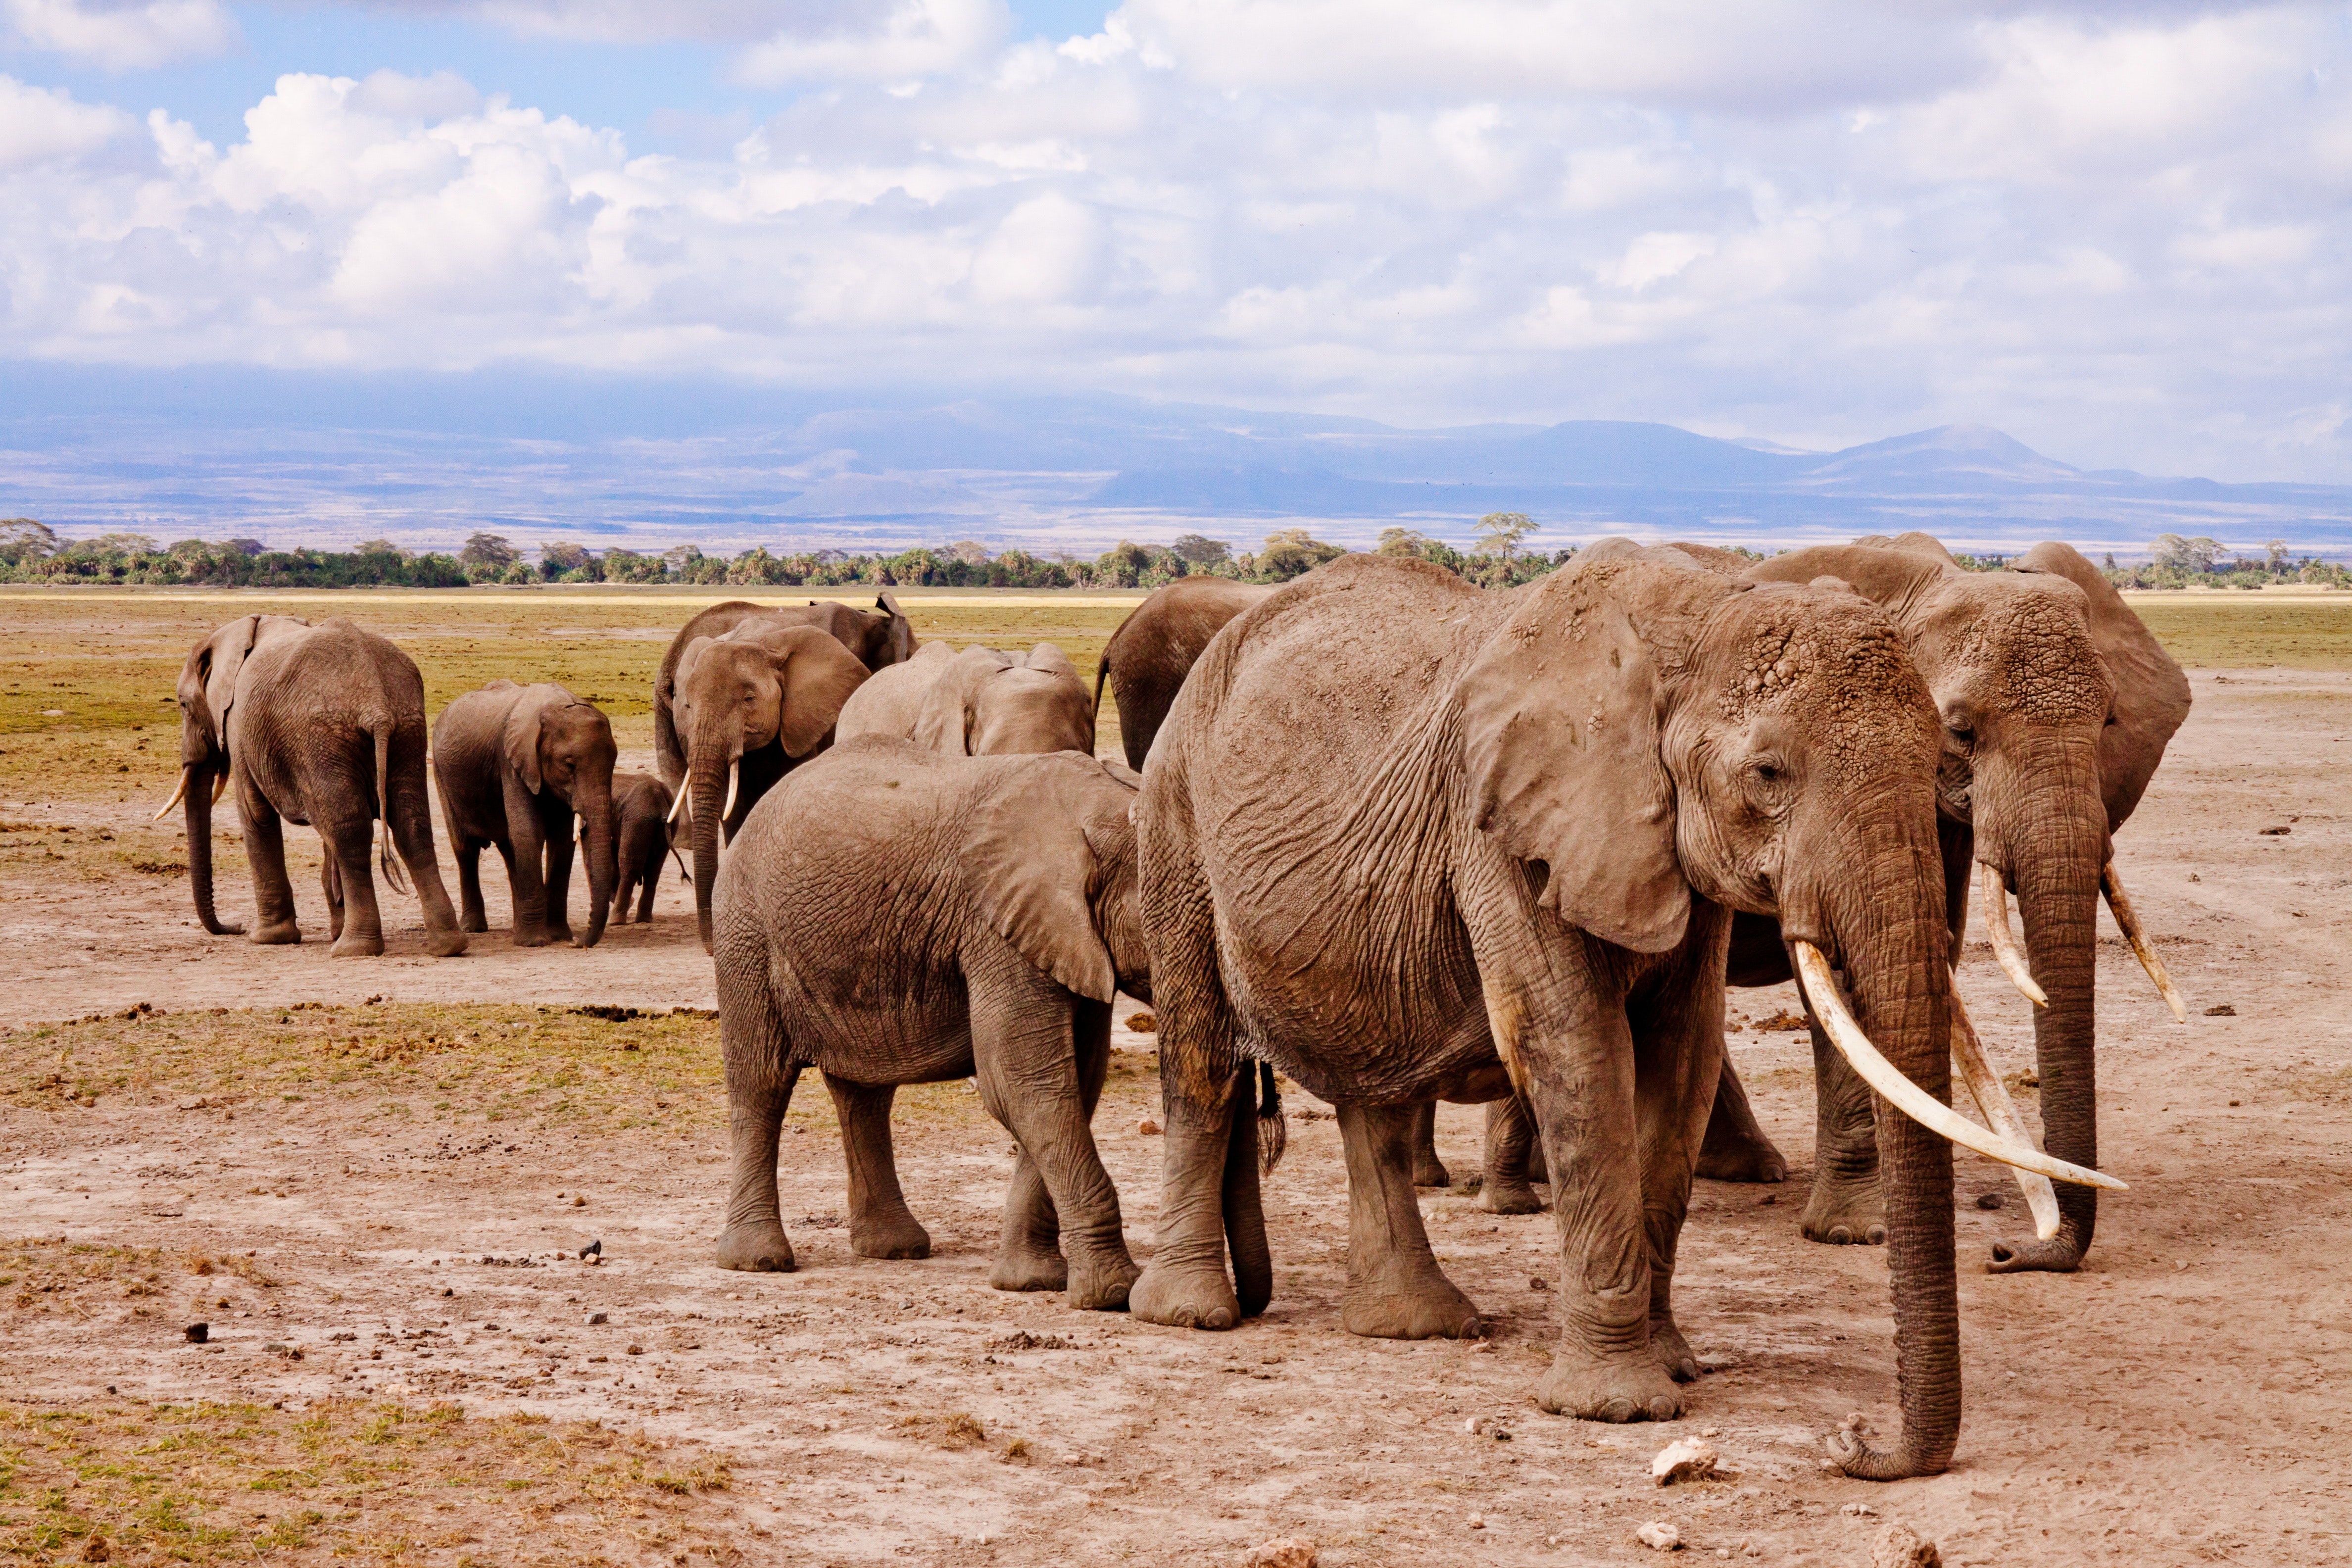 Group of Elephants on Walking on Brown Road during Daytime, Animal photography, Animals, Clouds, Elephants, HQ Photo